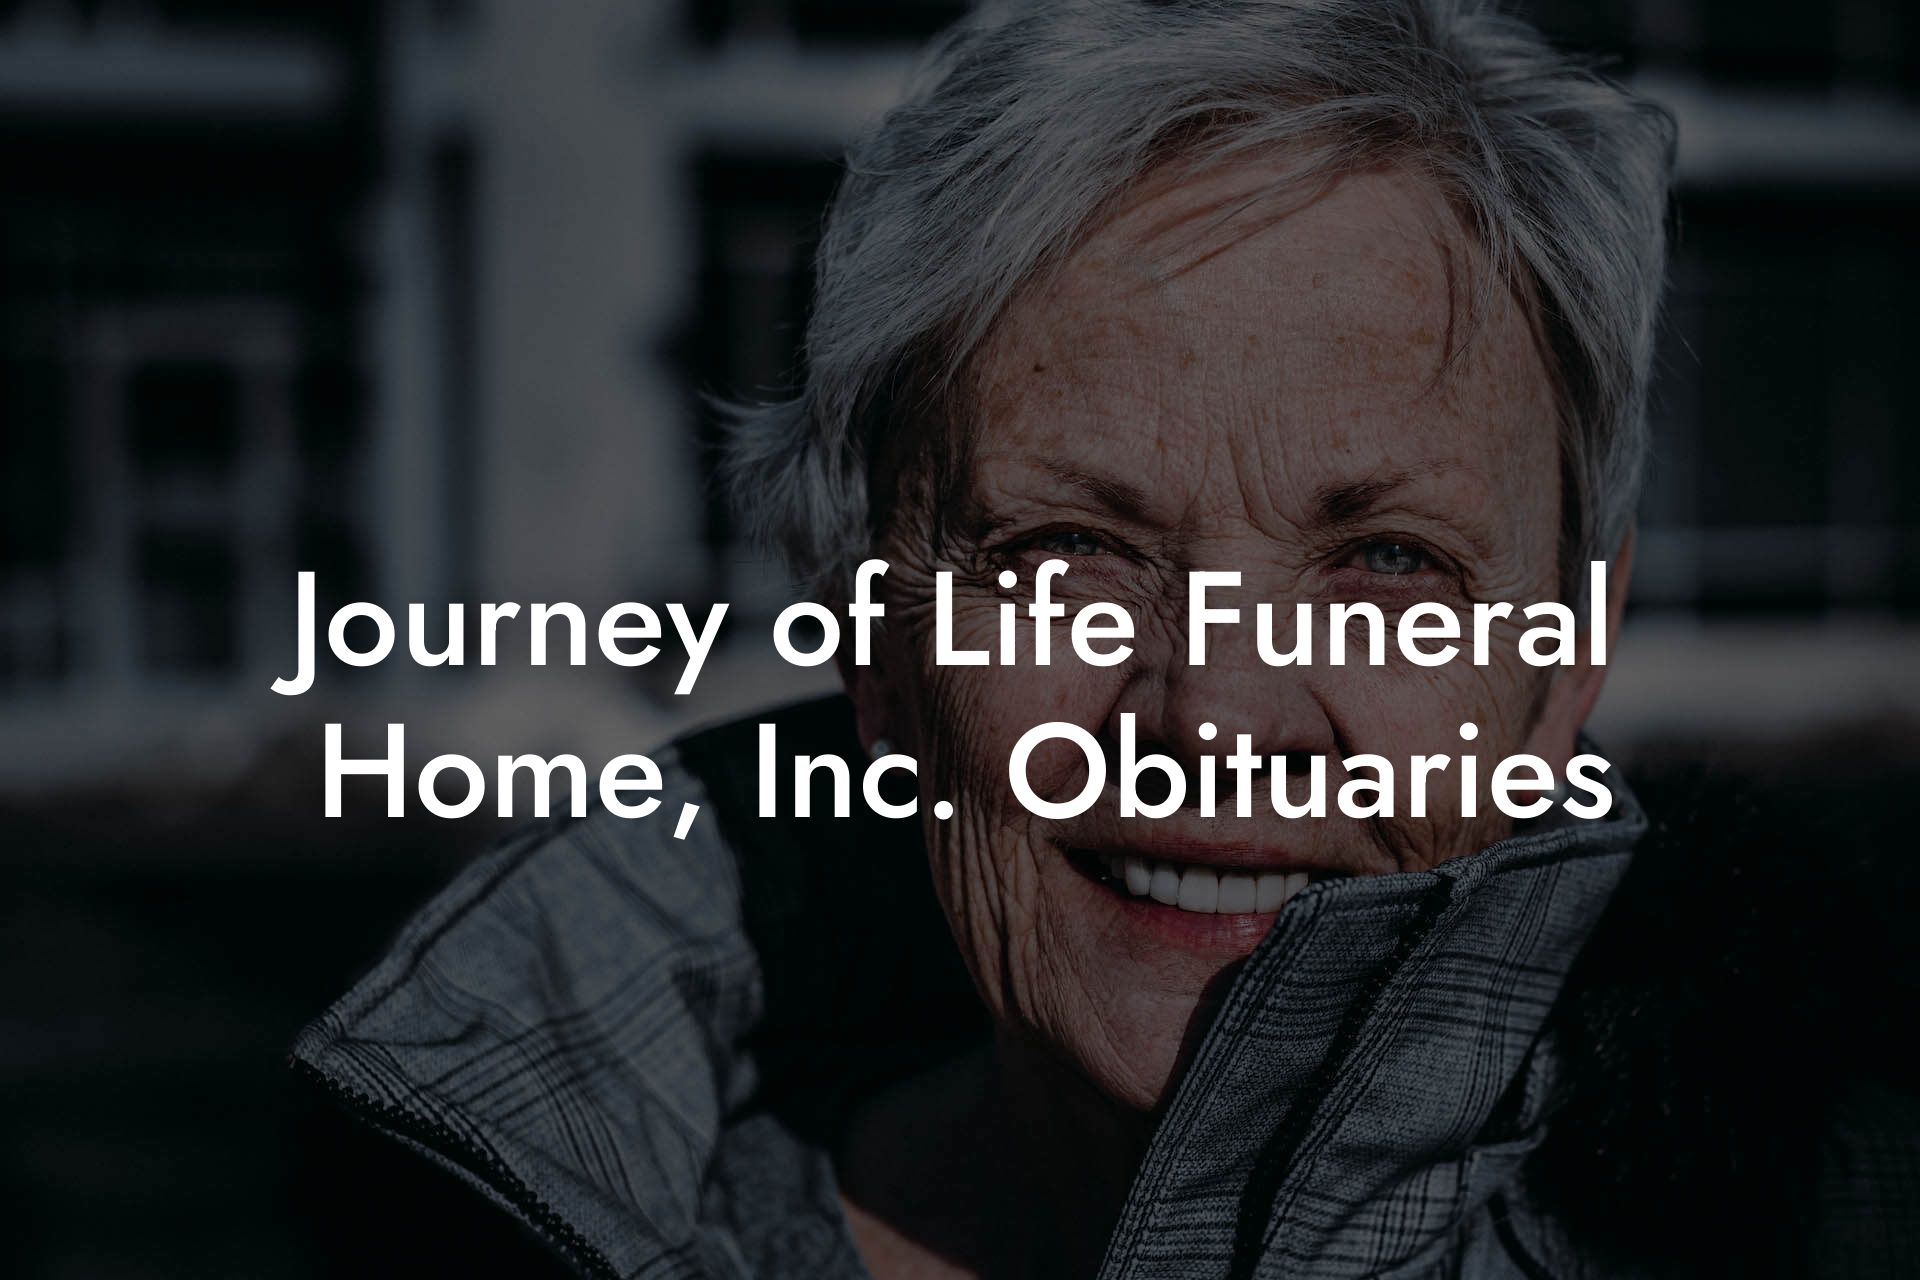 Journey of Life Funeral Home, Inc. Obituaries